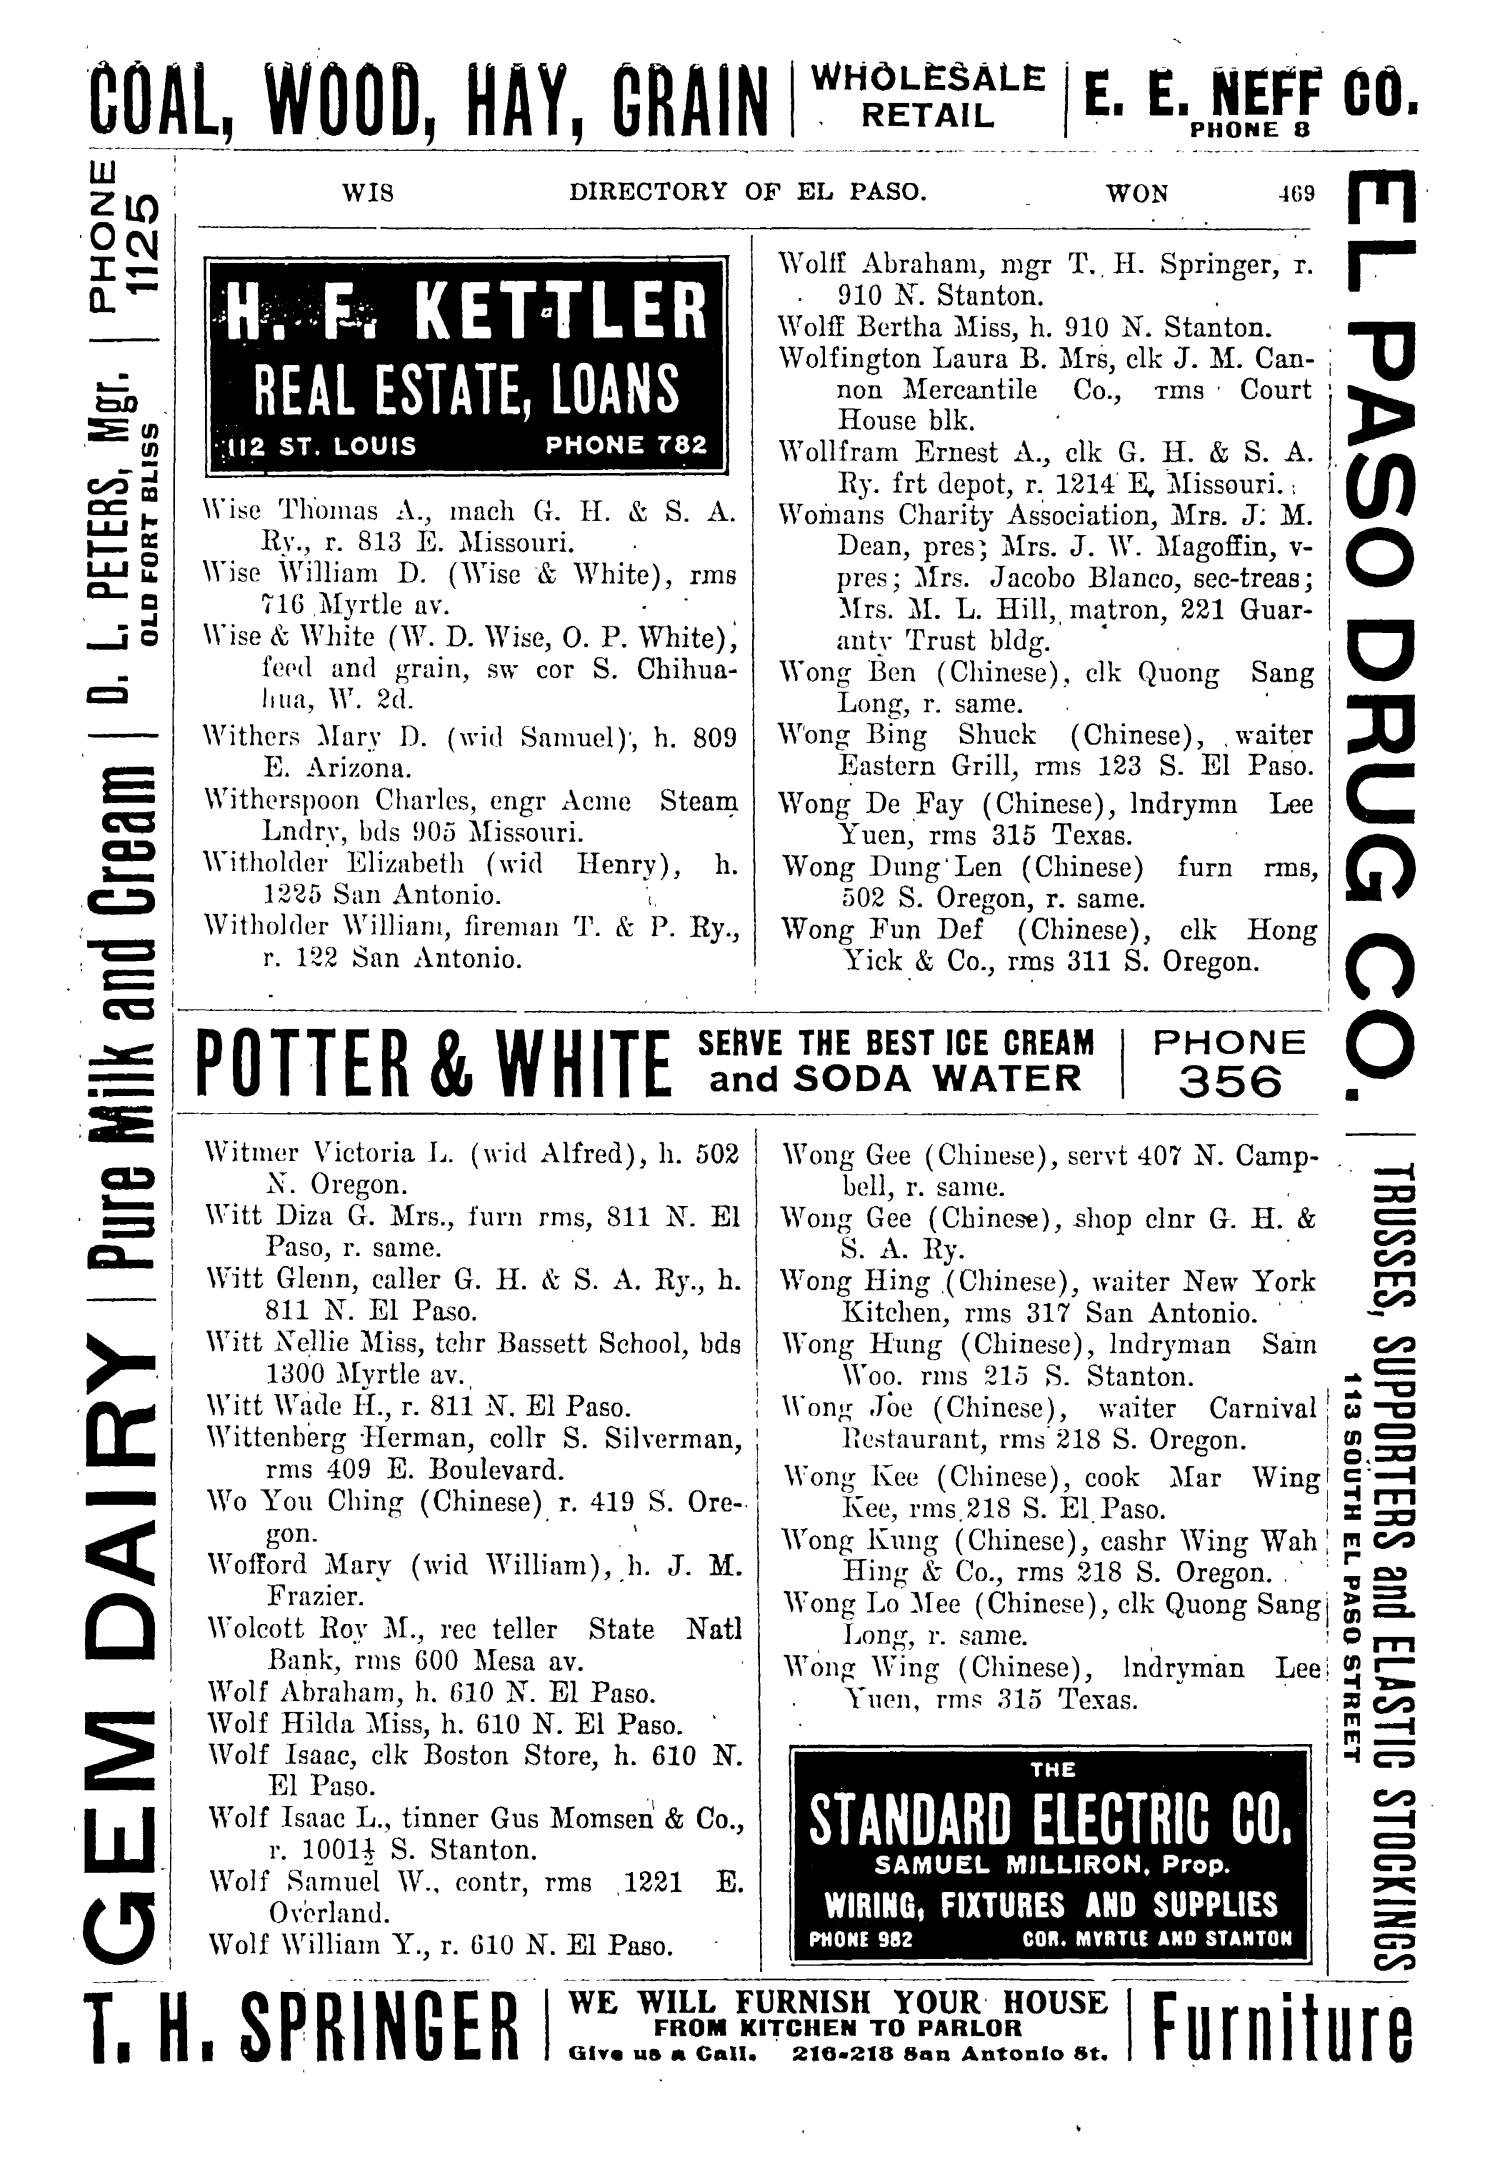 John F. Worley & Co.'s El Paso Directory for 1906
                                                
                                                    469
                                                